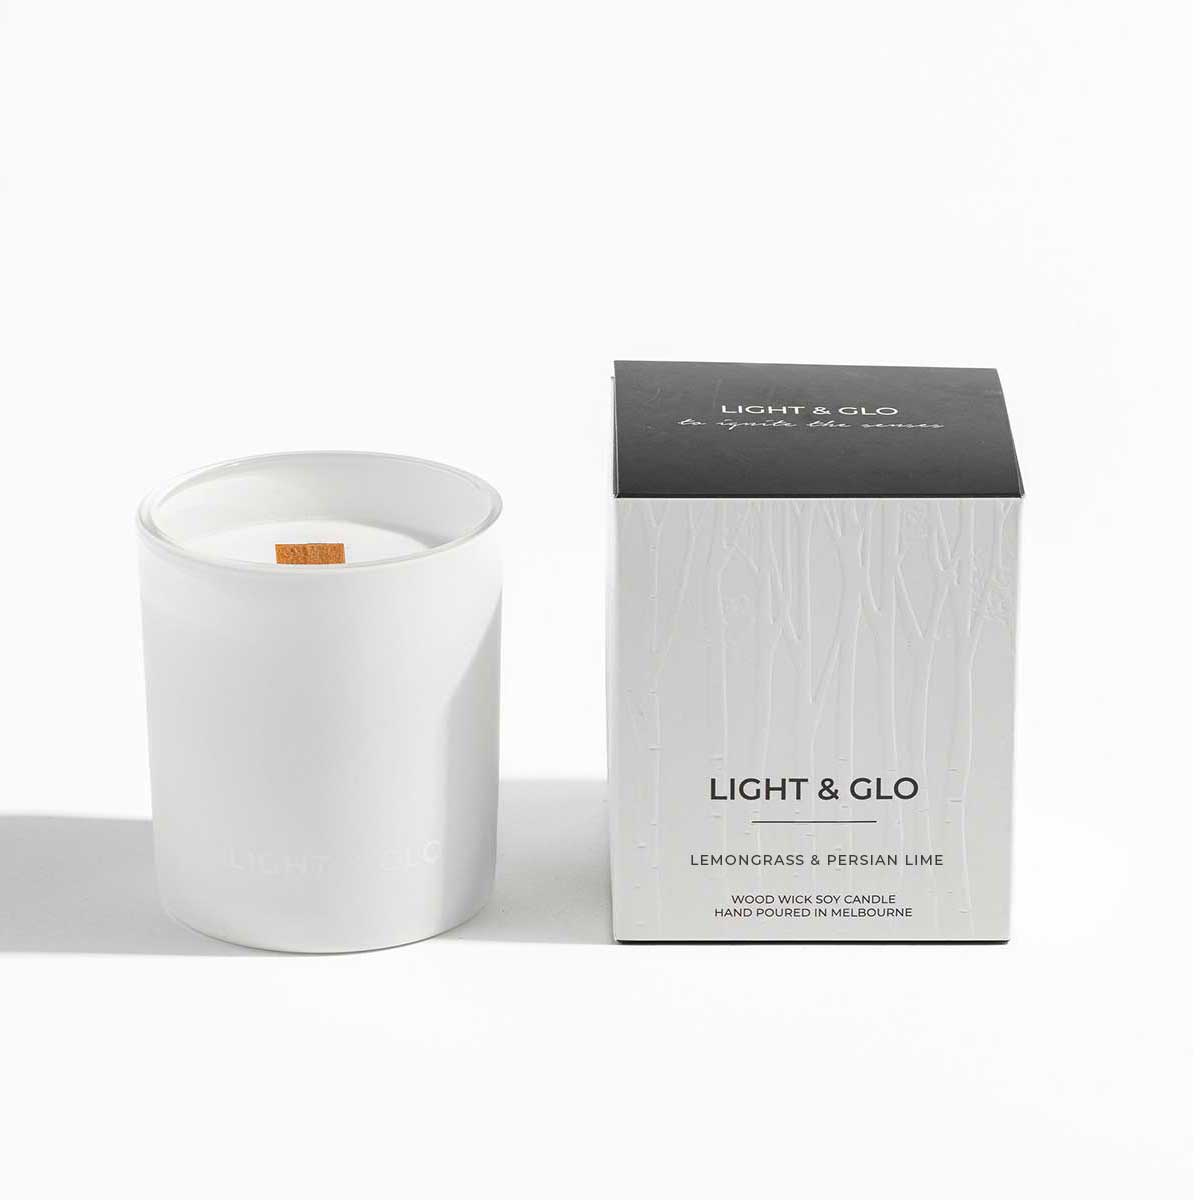 Lemongrass & Persian Lime - Monochrome Large 300g Candle | Luxury Candles & Home Fragrances by Light + Glo